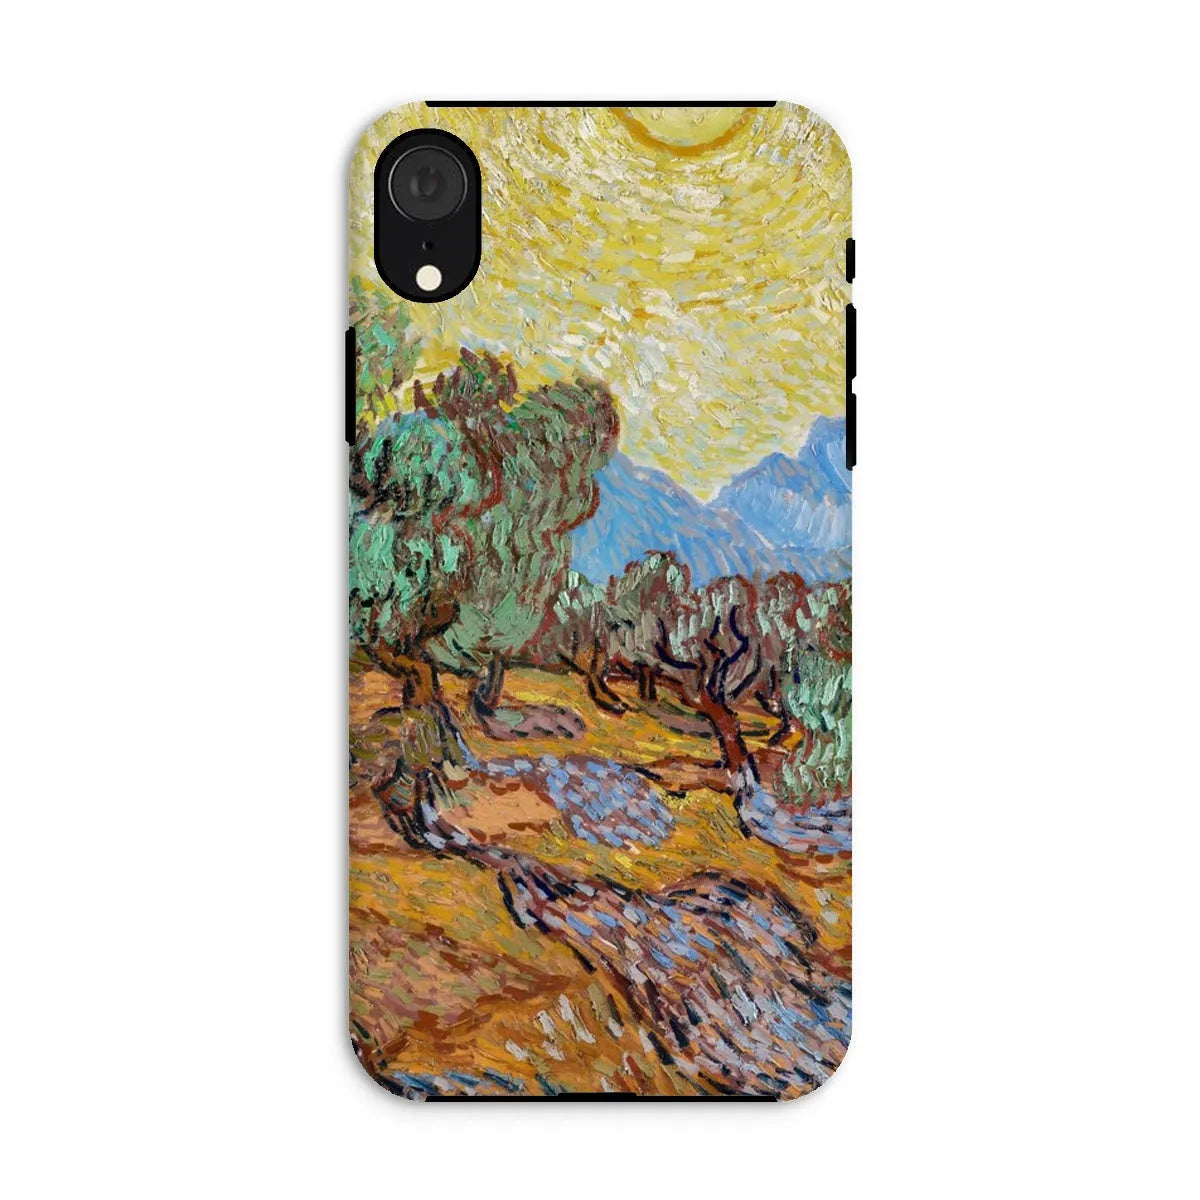 Olive Trees Too - Impressionist Phone Case - Vincent Van Gogh - Iphone Xr / Matte - Mobile Phone Cases - Aesthetic Art